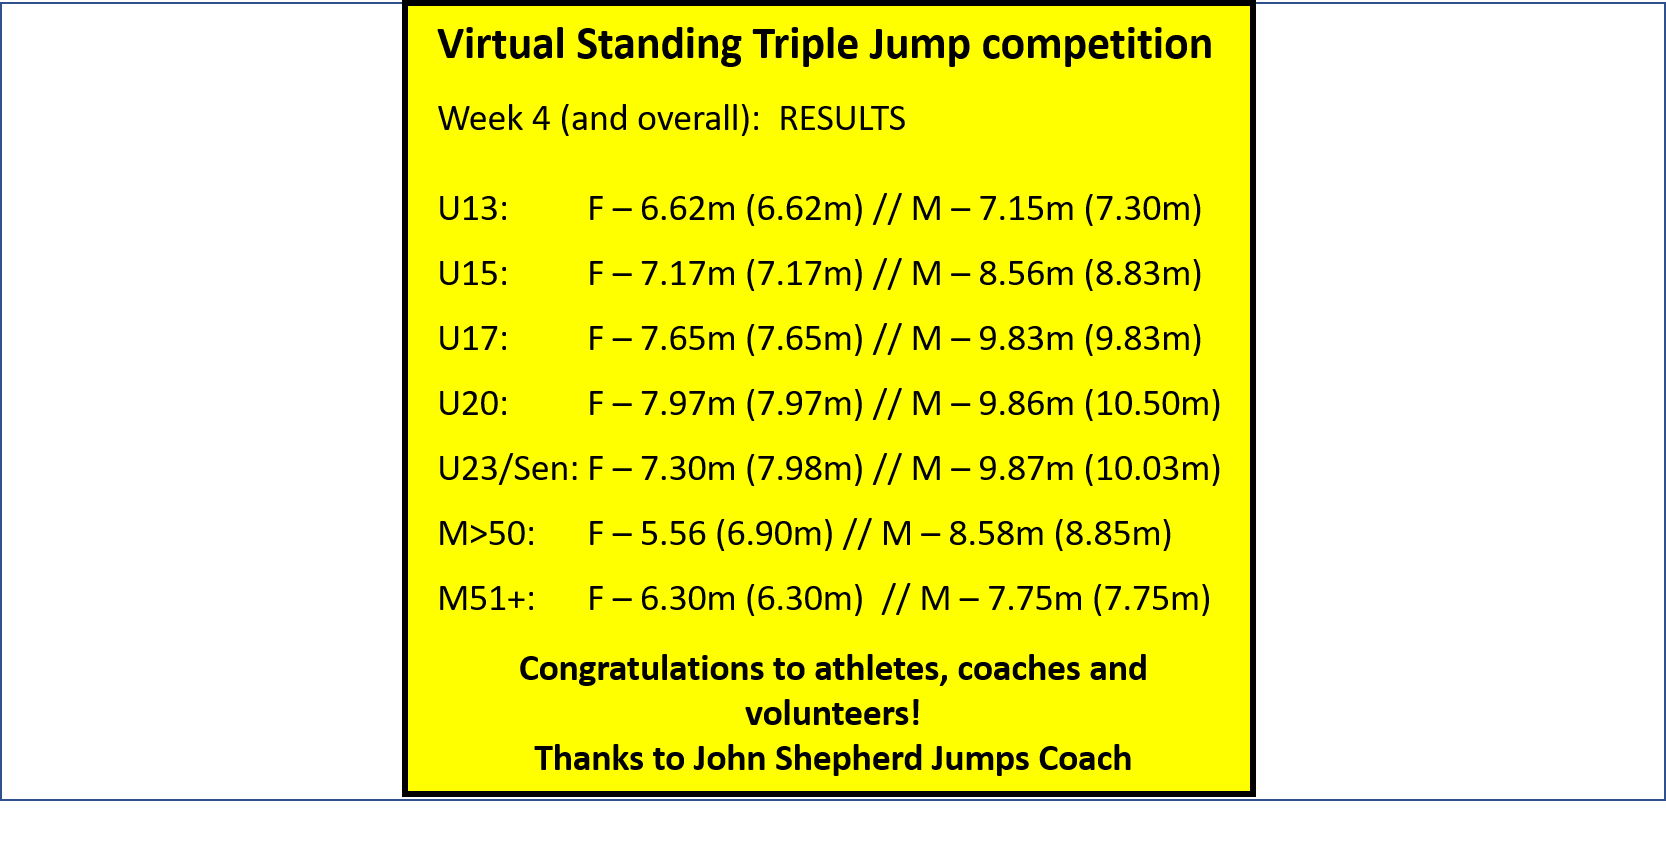 Virtual Standing Triple Jump week 4 and overall results